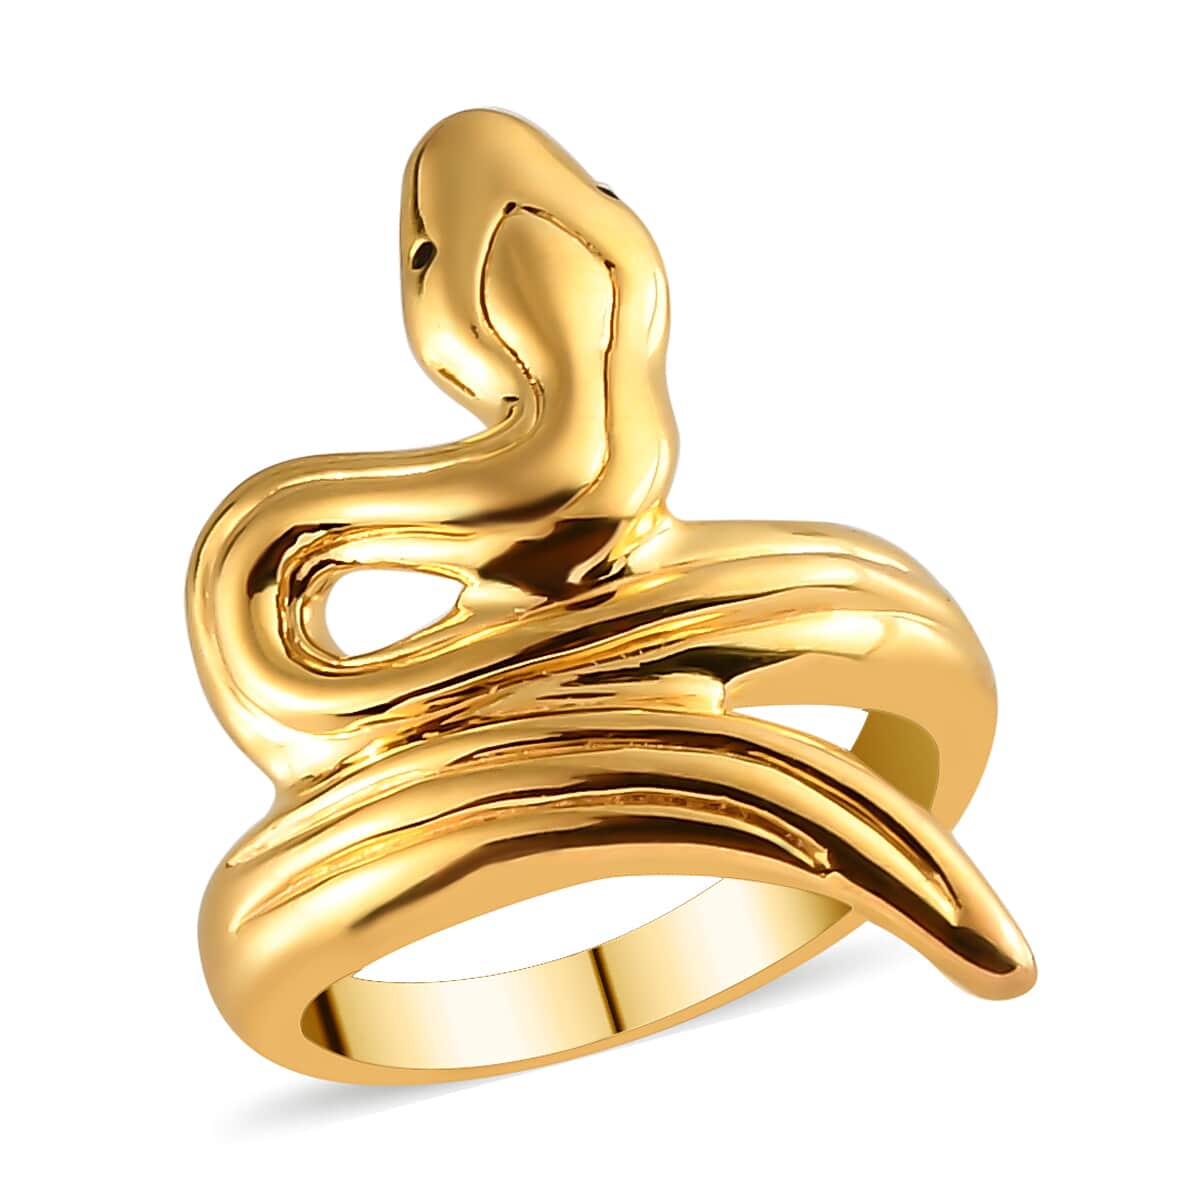 Super Find Electroforming Gold Collection 18K Yellow Gold Snake Ring (Size 5.0) 2.25 Grams image number 0